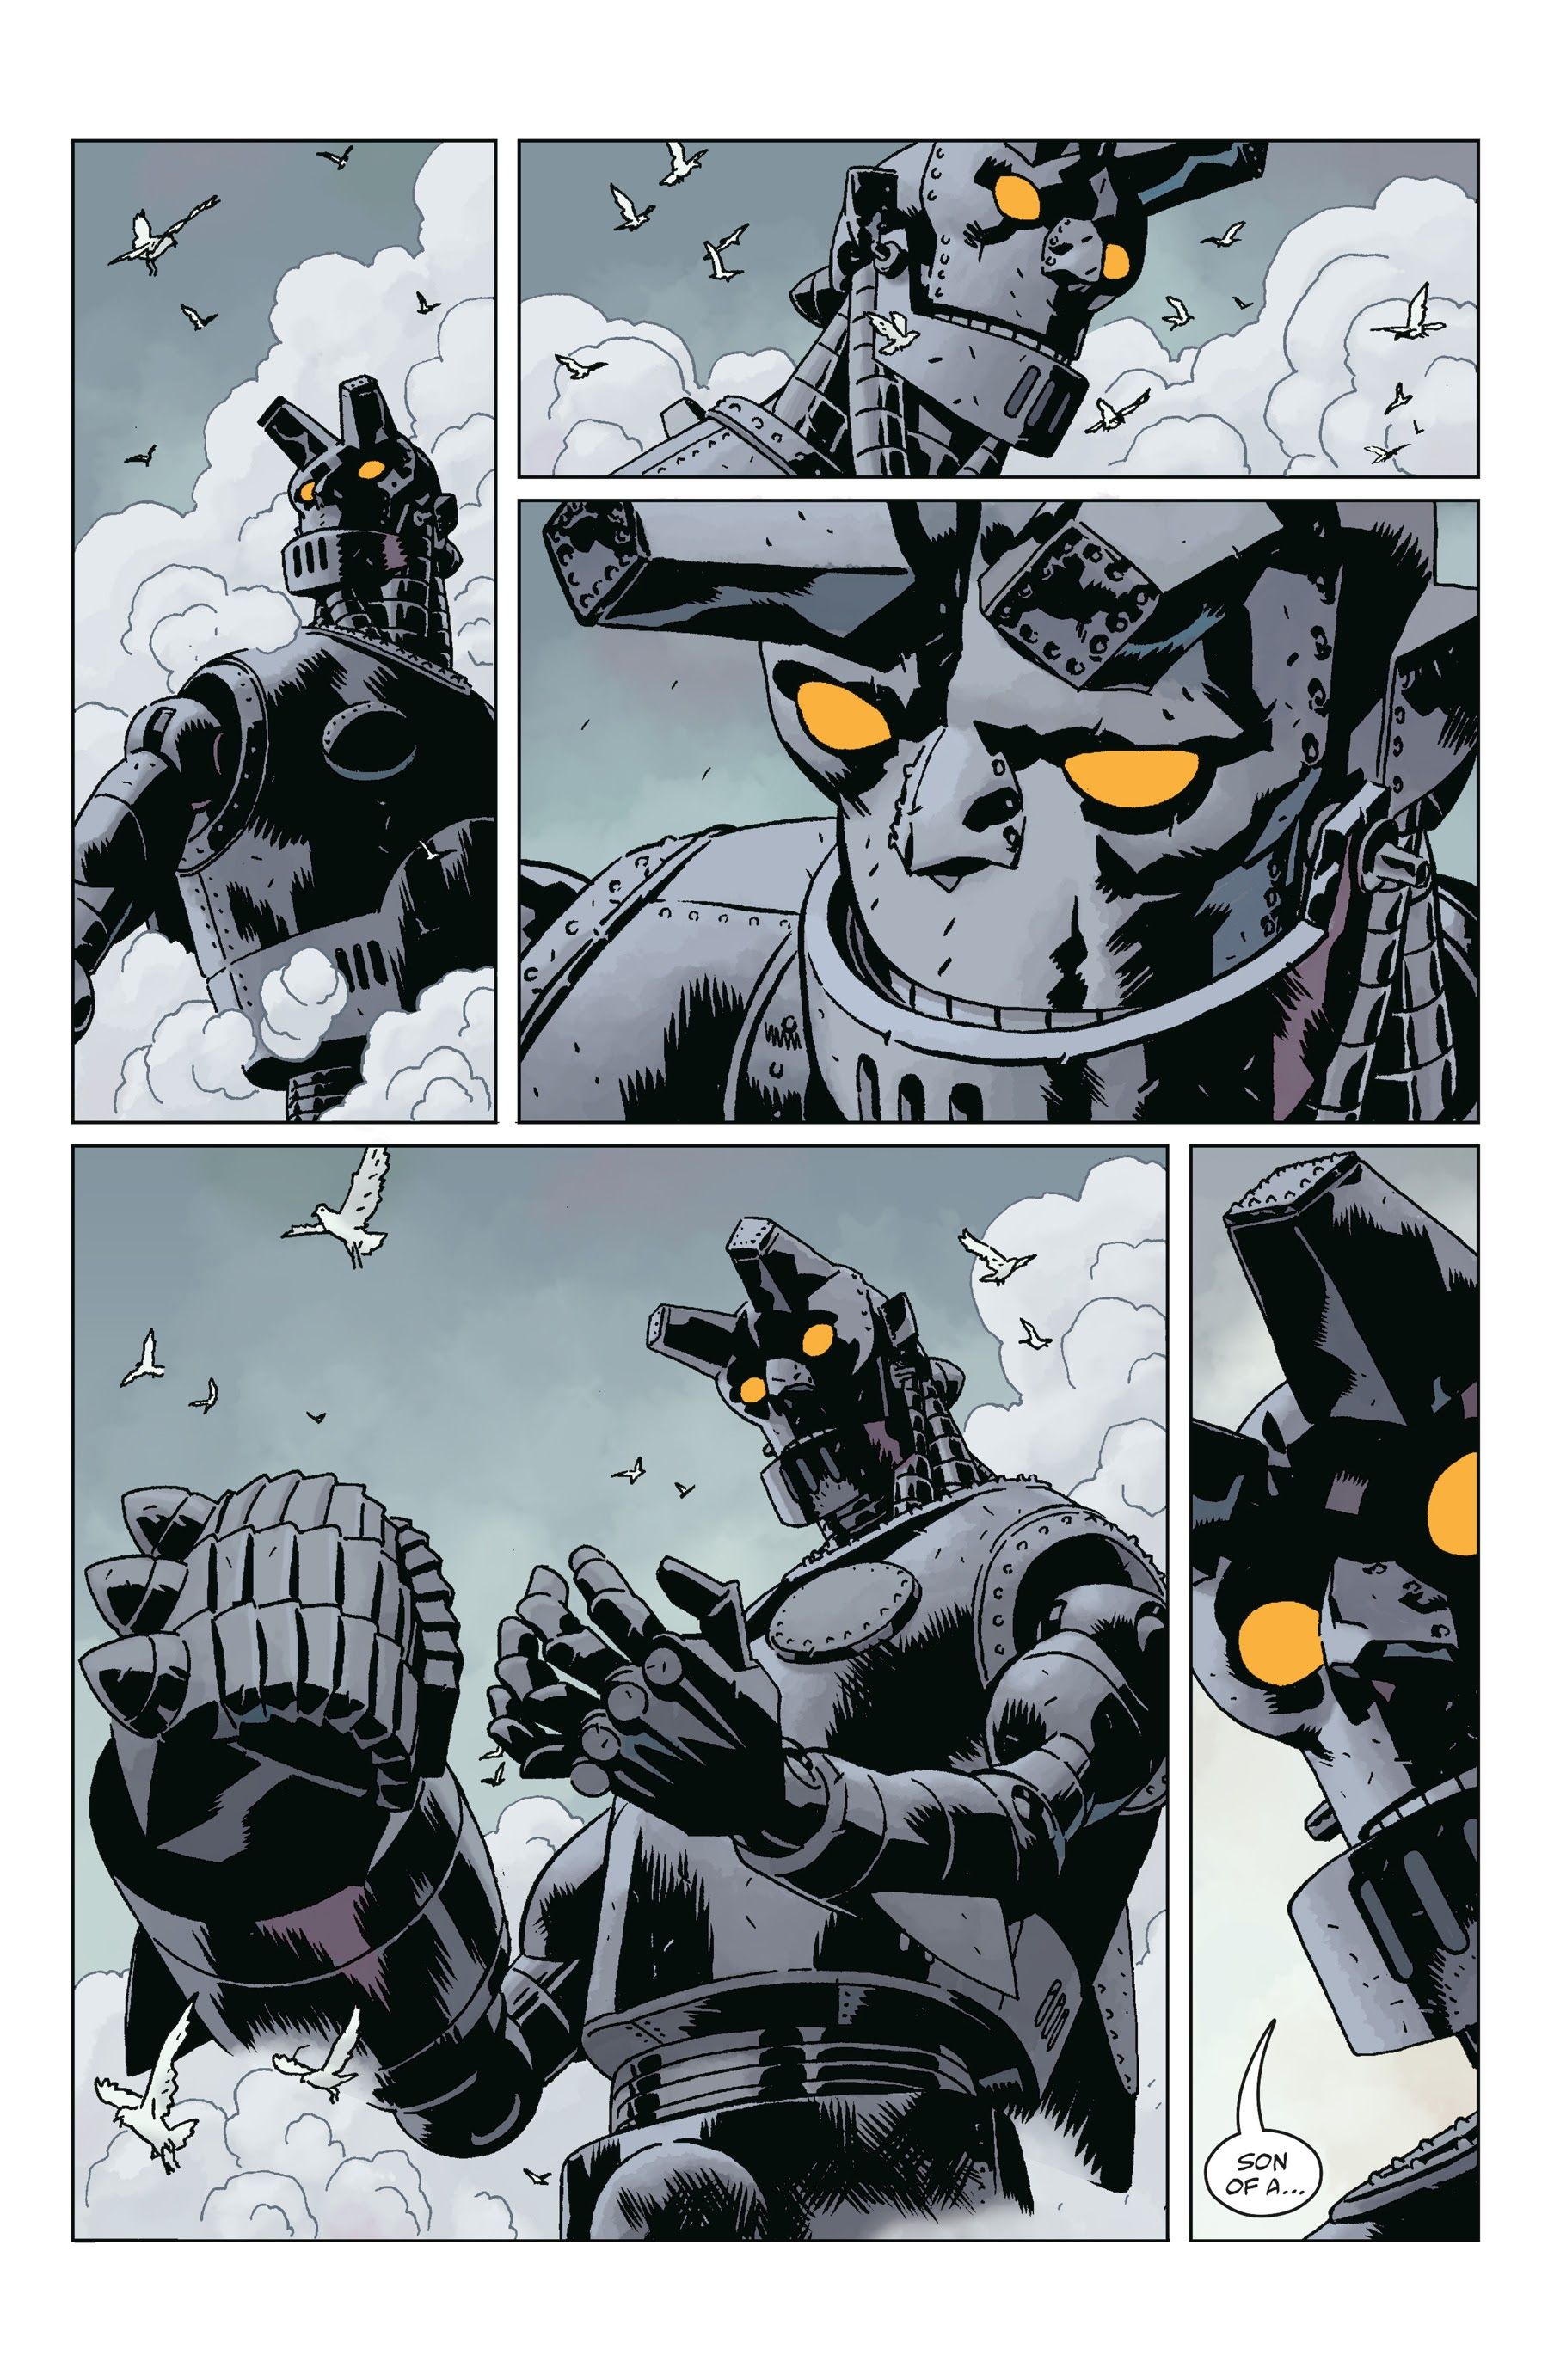 Giant Robot Hellboy Suits Up for Action